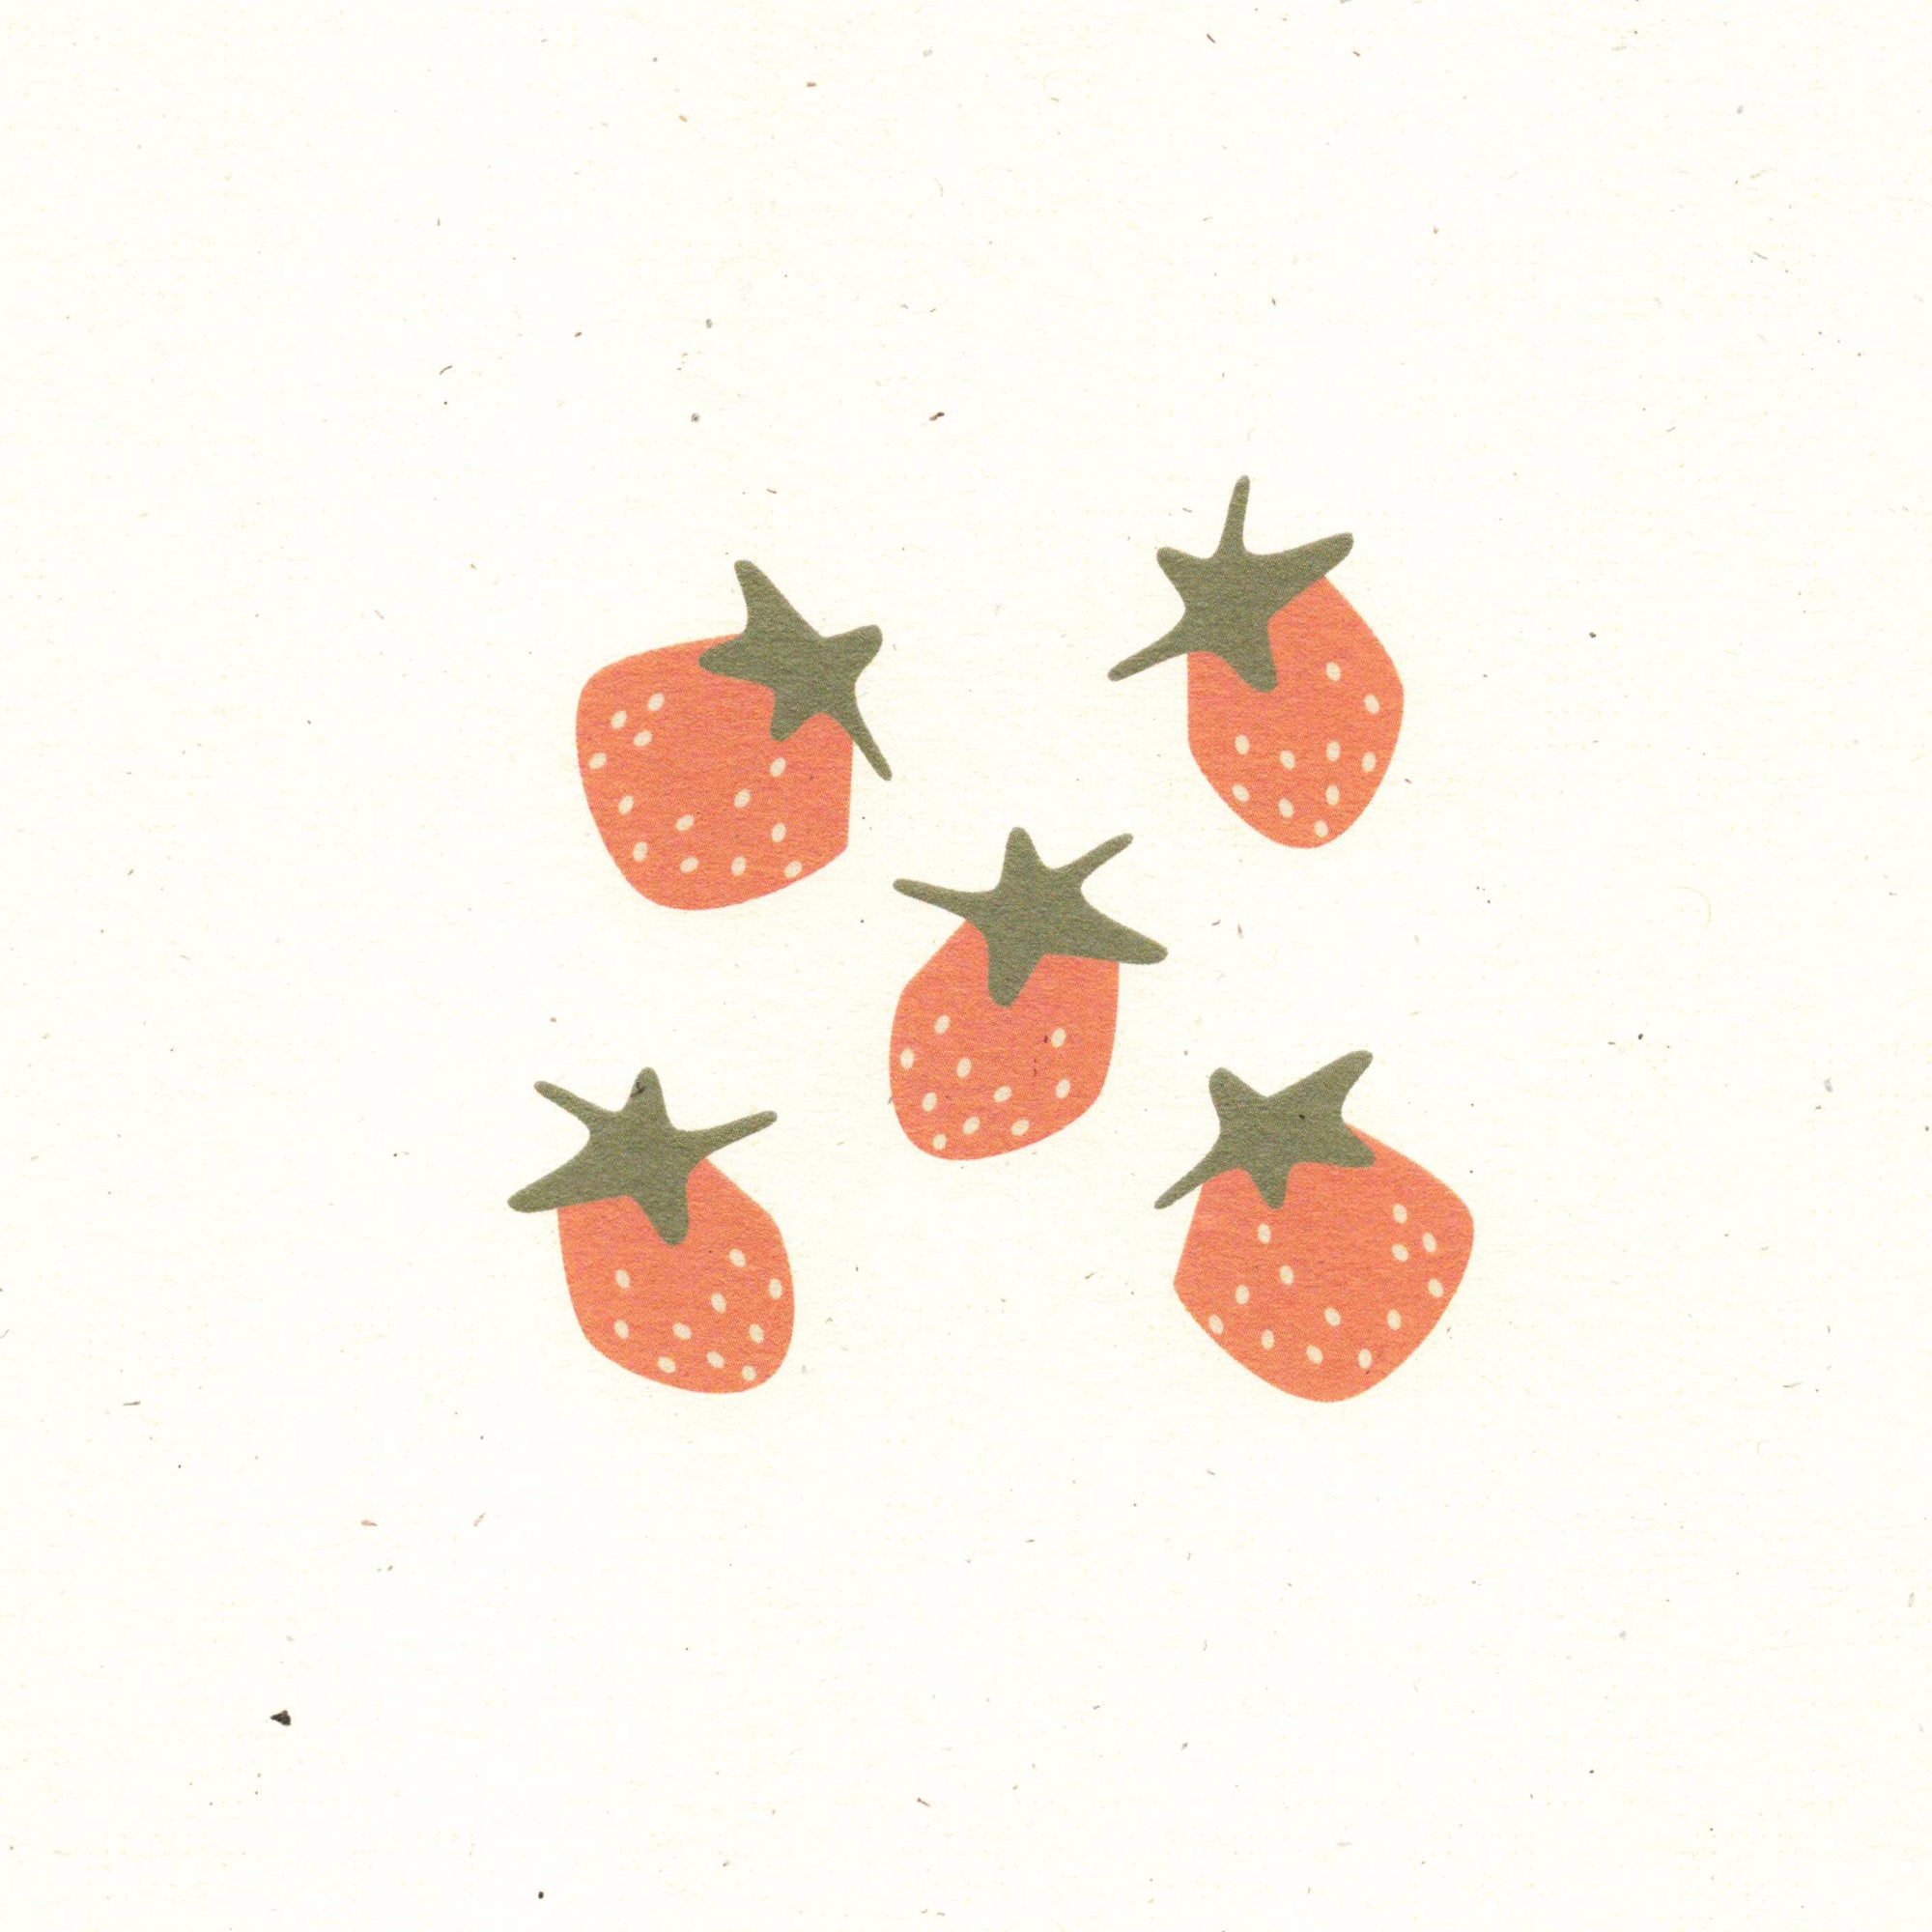 A close-up view of the strawberries design, printed on recycled, natural paper, with flecks visible in the paper surface.